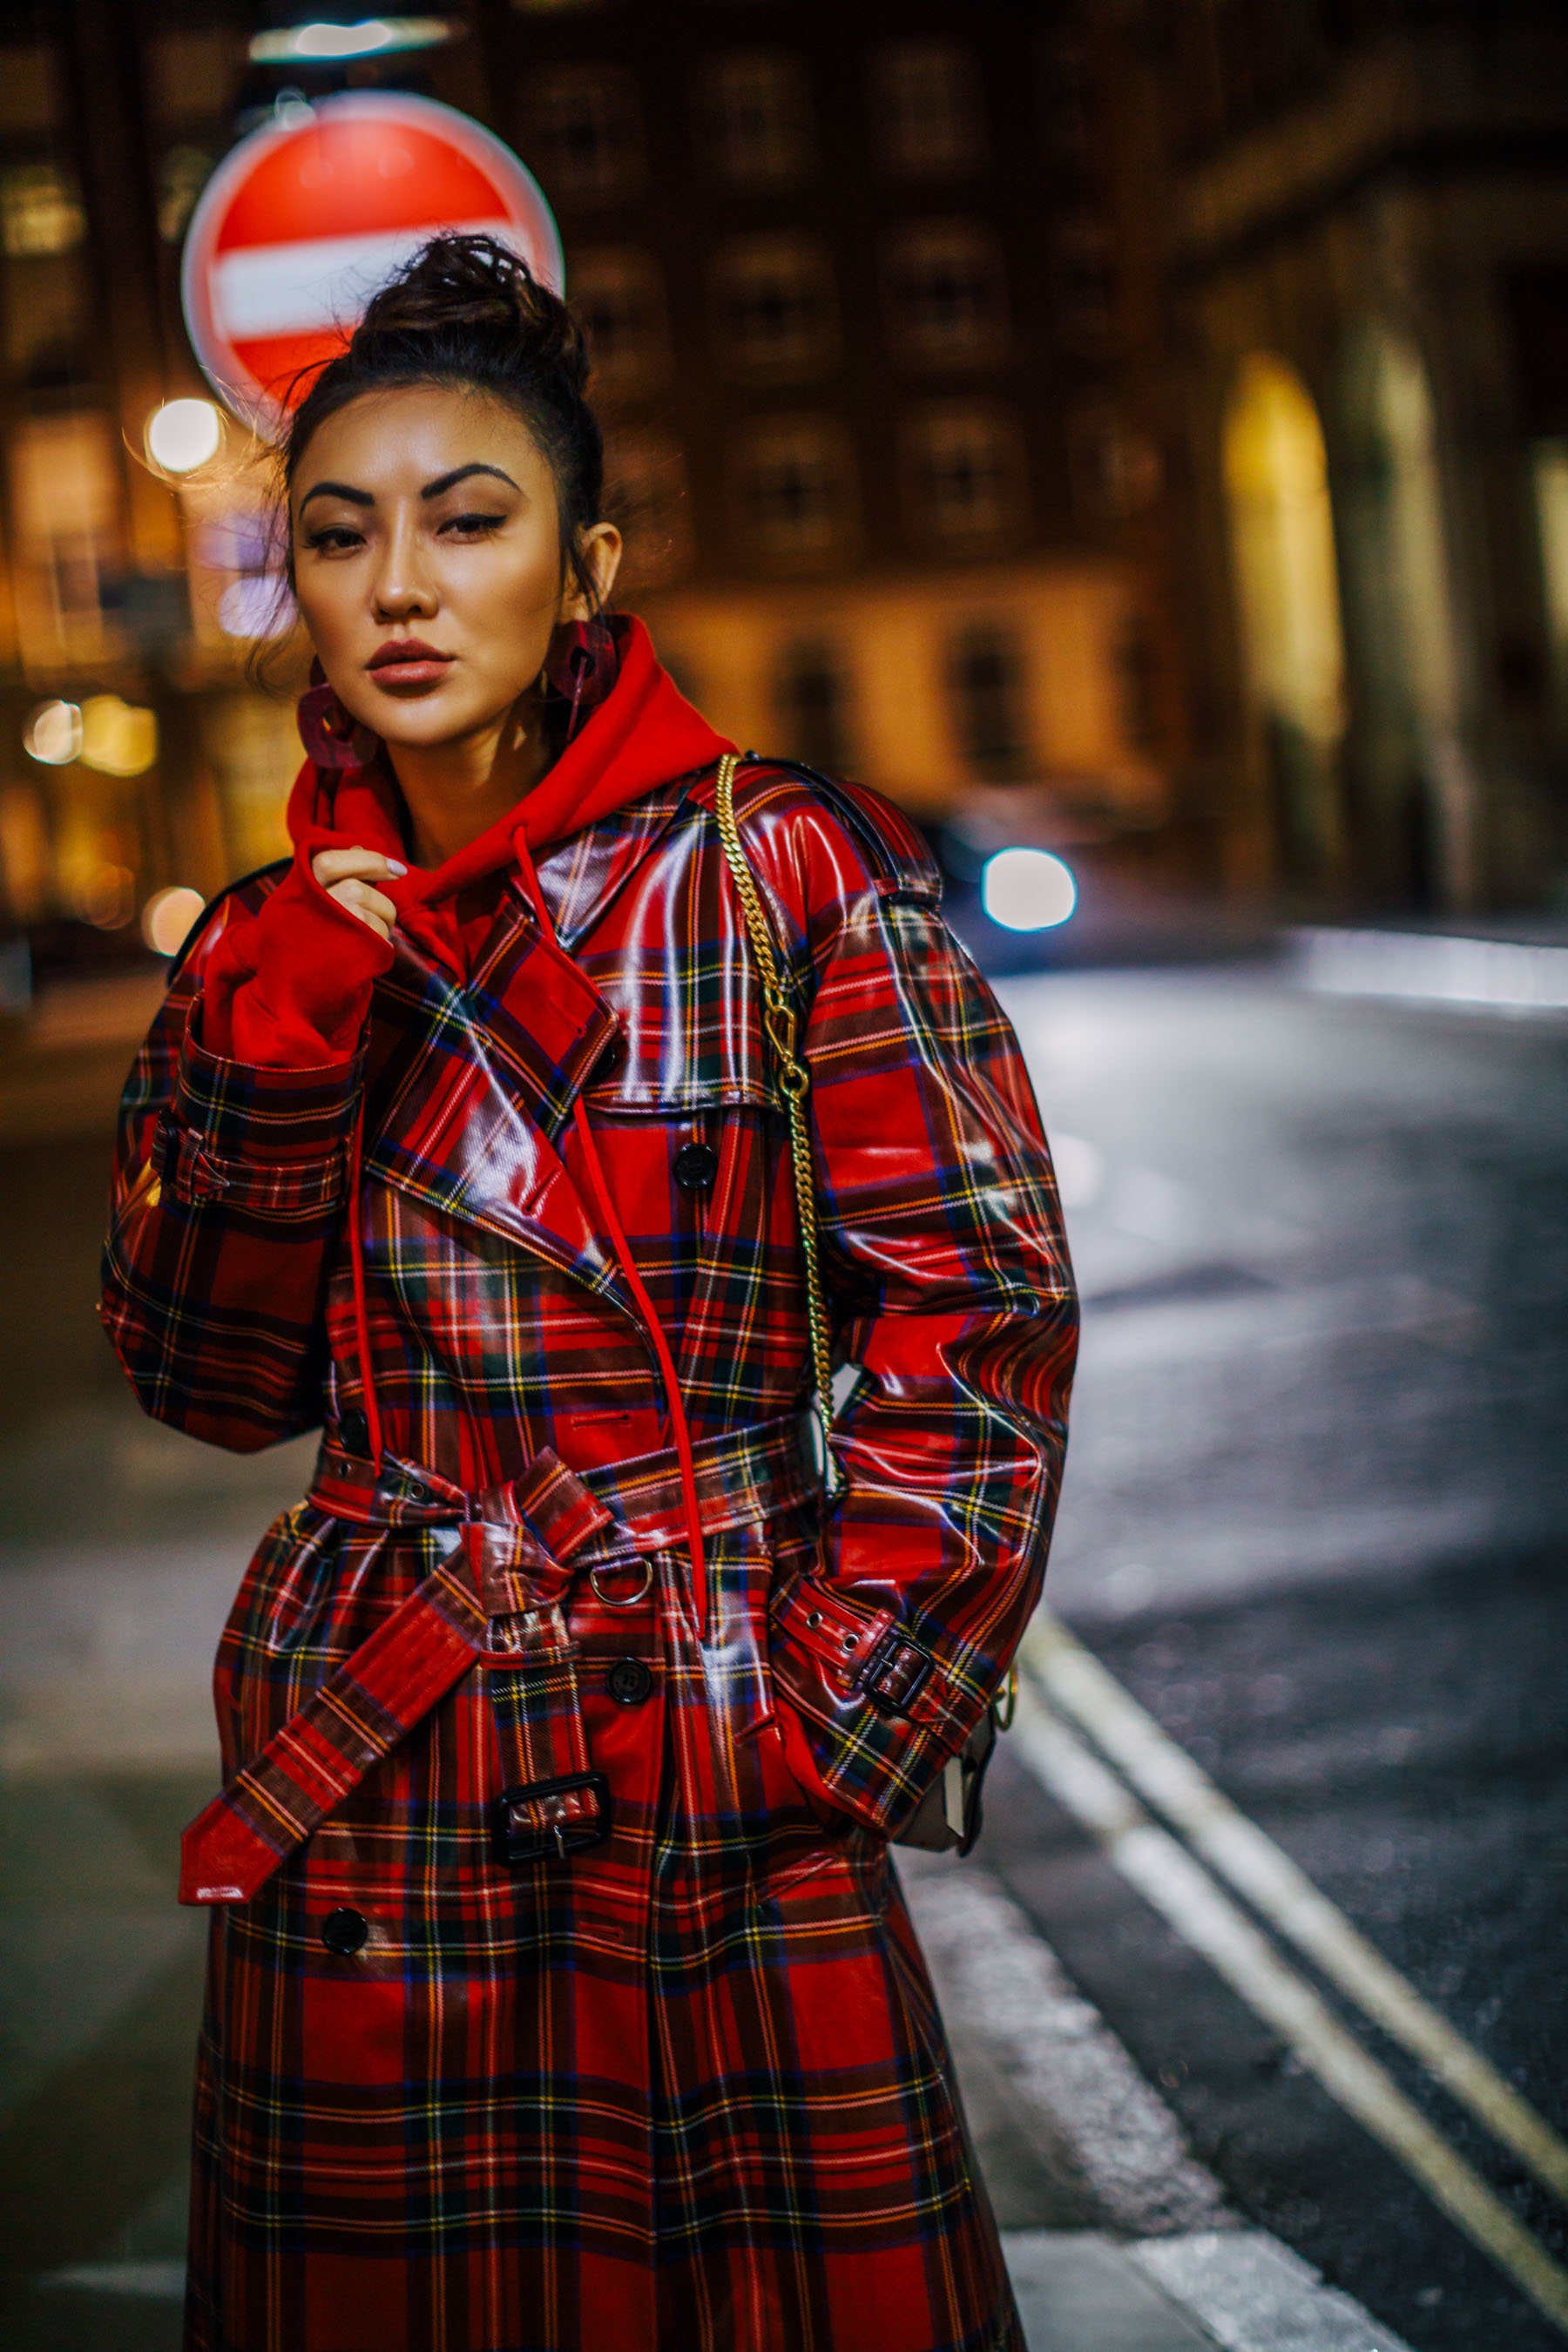 New Trench Coat Styles to Try in Spring 2018 - Burberry Plaid Trench Coat // Notjessfashion.com